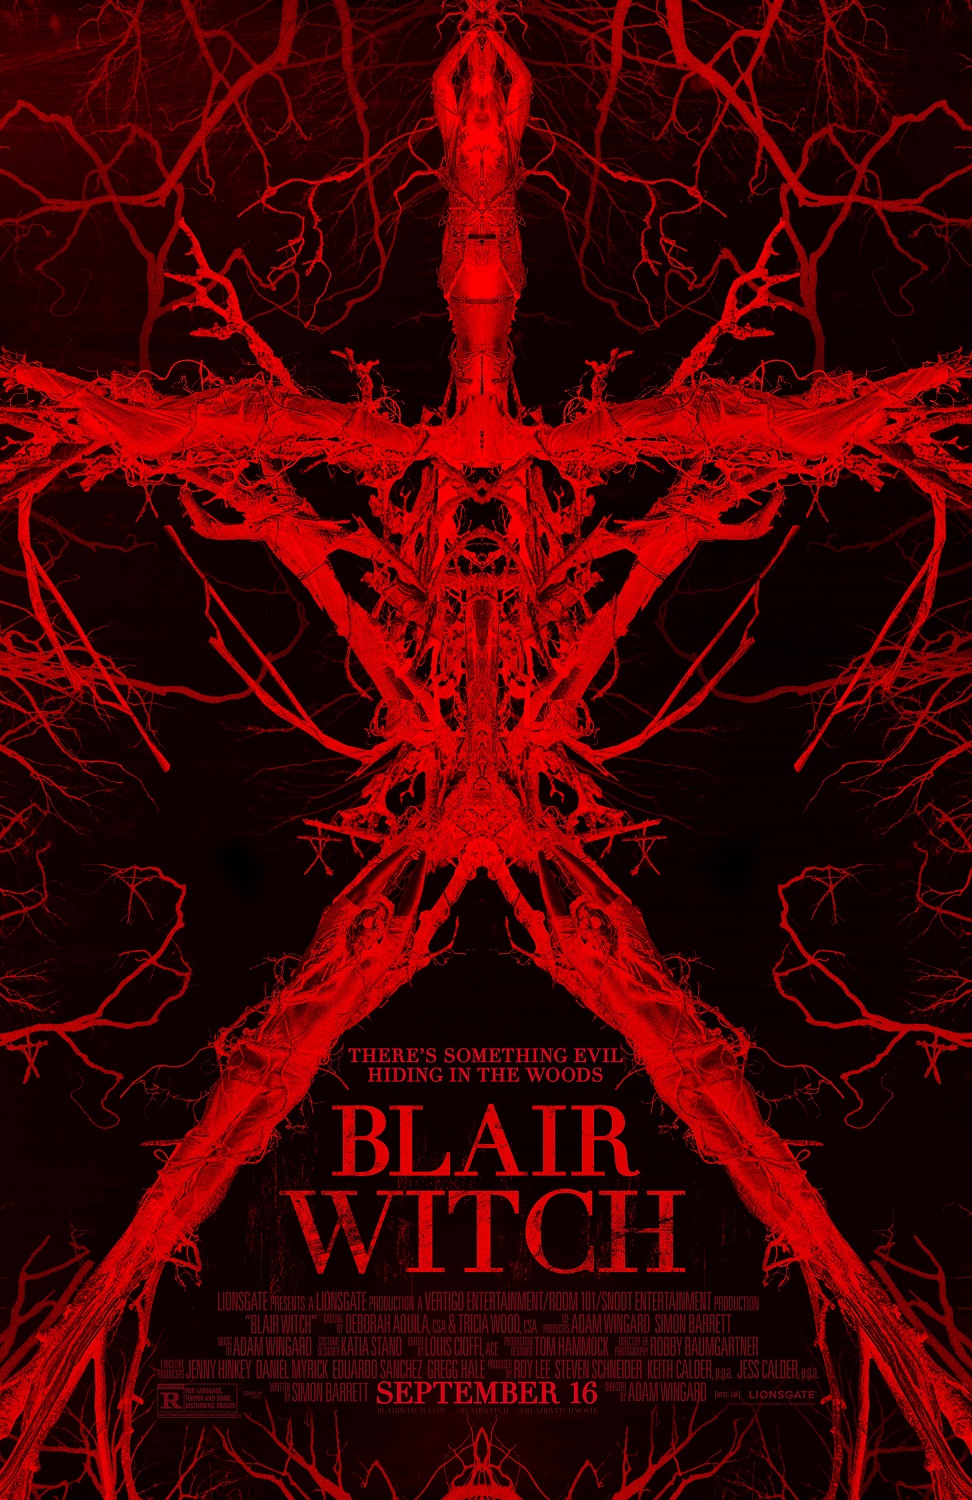 Blair Witch (2016) – Expanding on the Legend